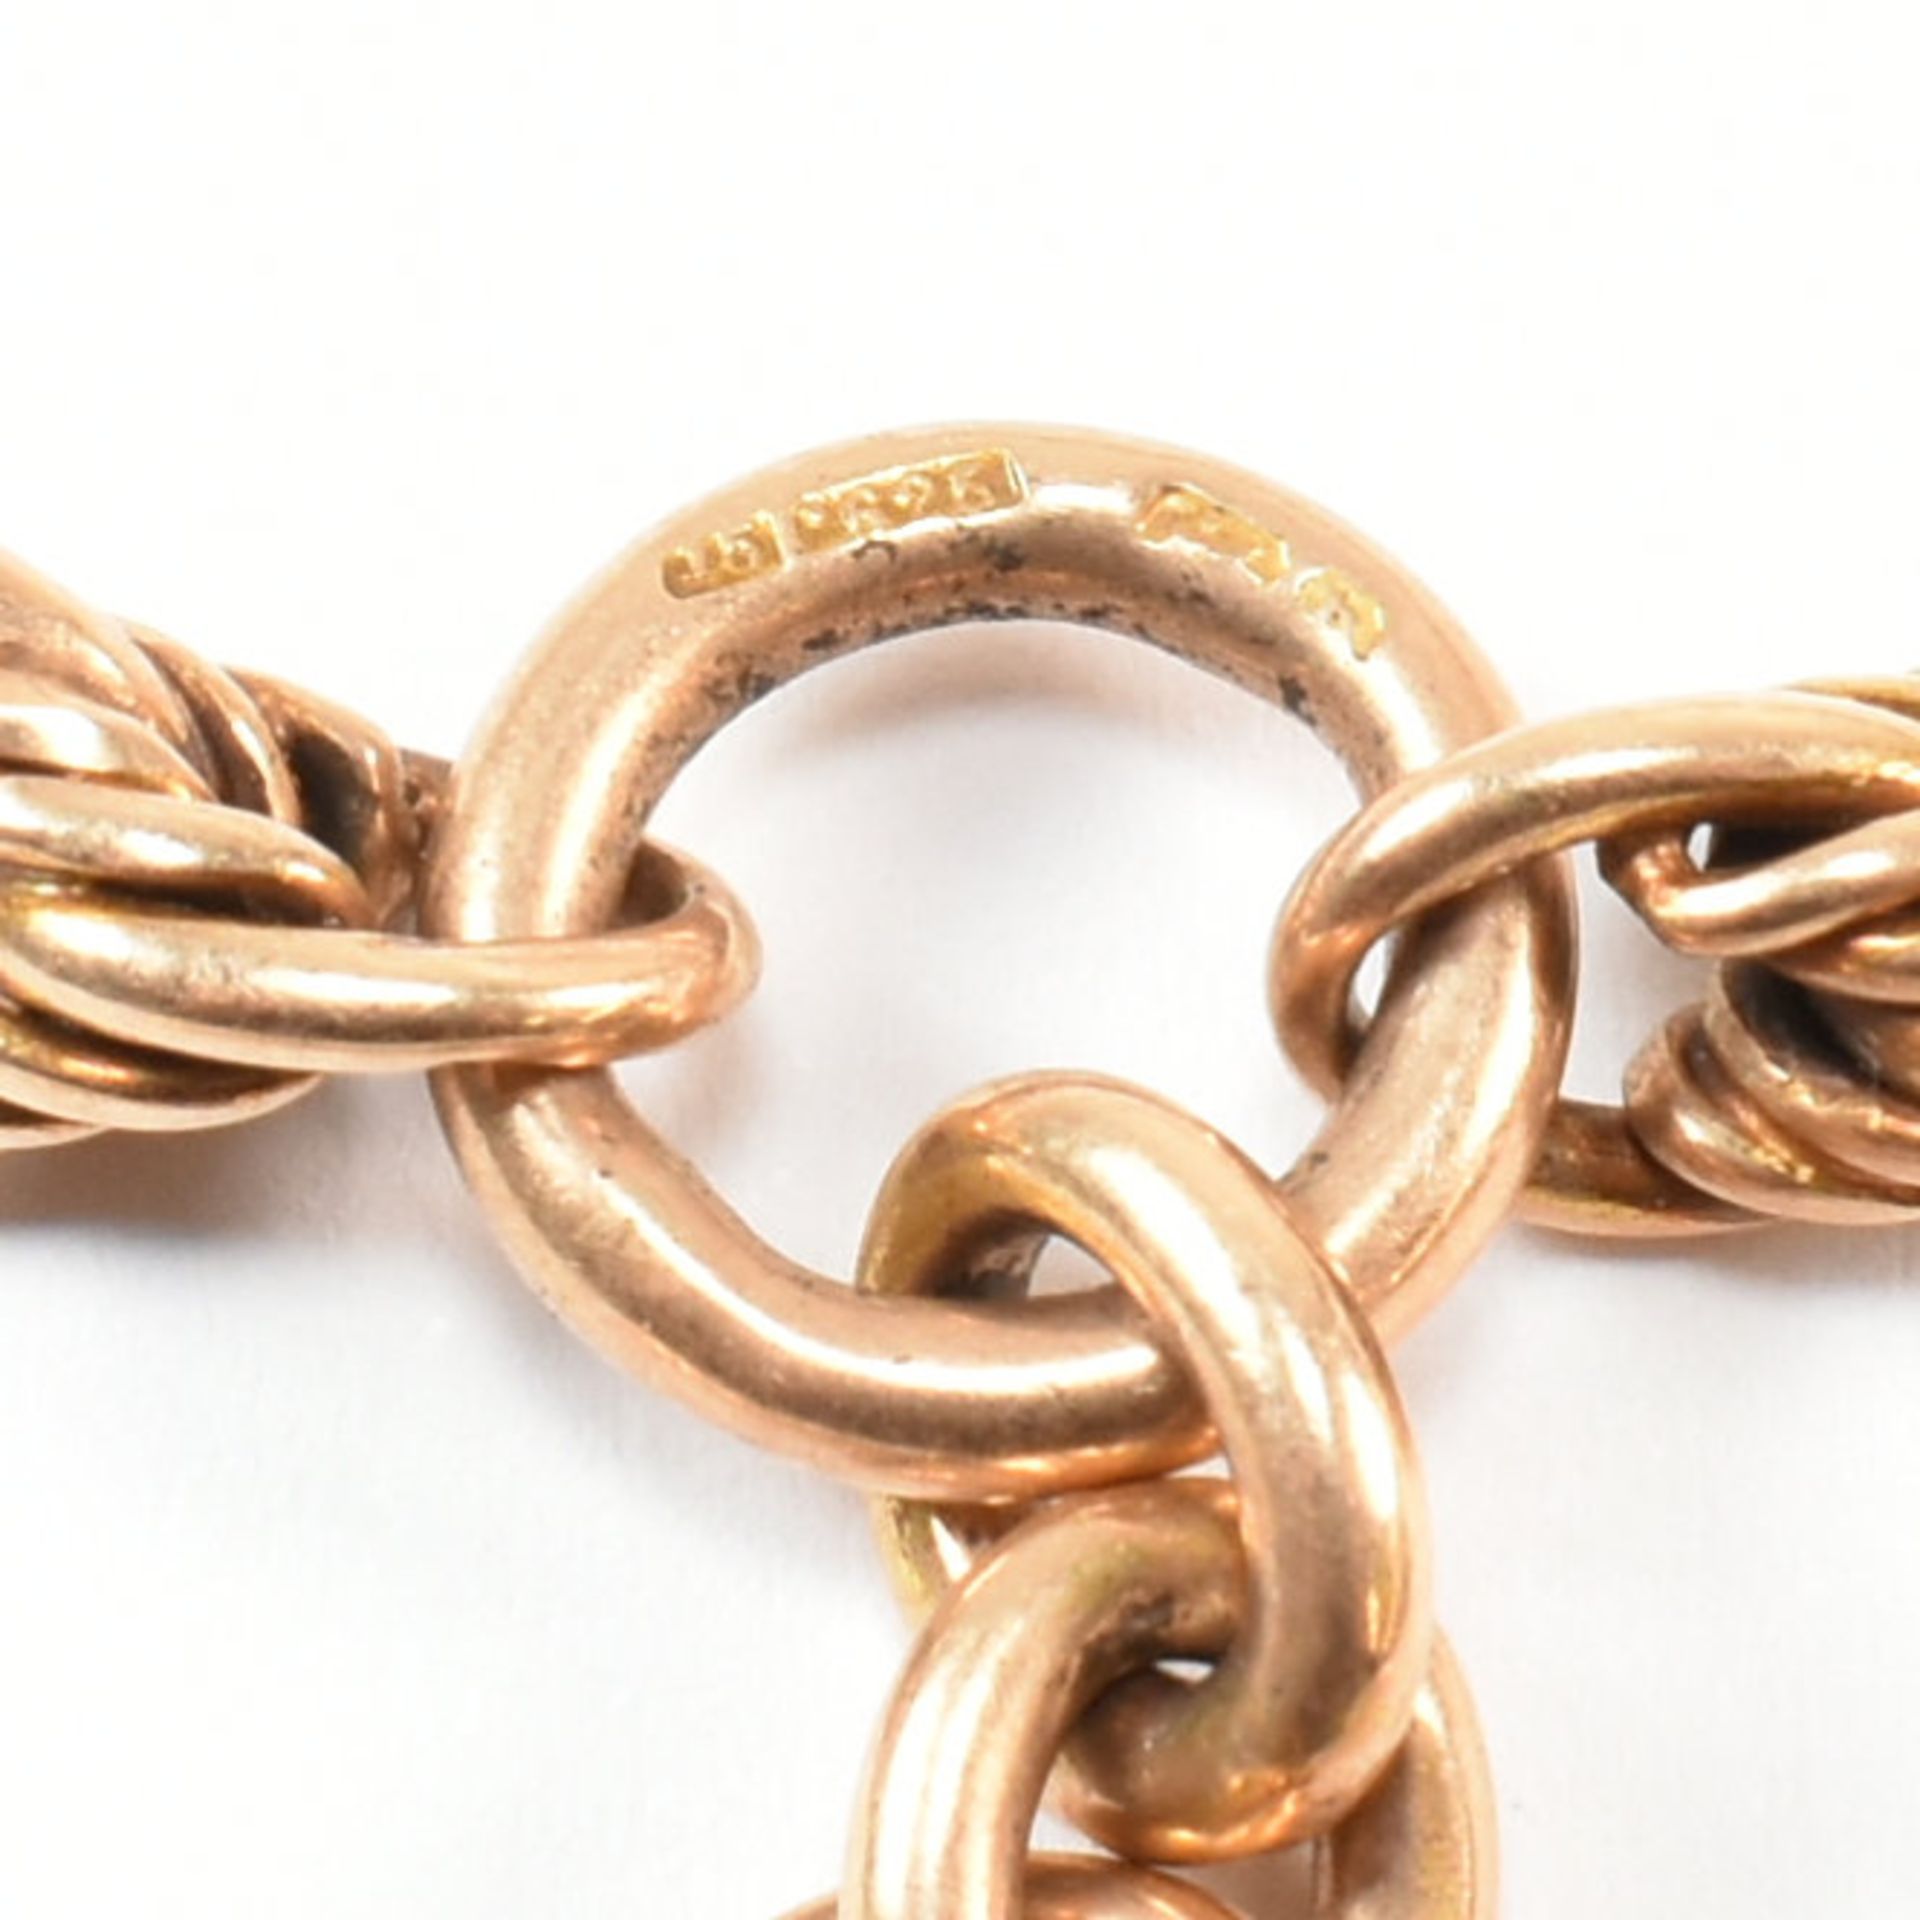 EDWARDIAN HALLMARKED 15CT GOLD ALBERT CHAIN WITH T-BAR - Image 5 of 5